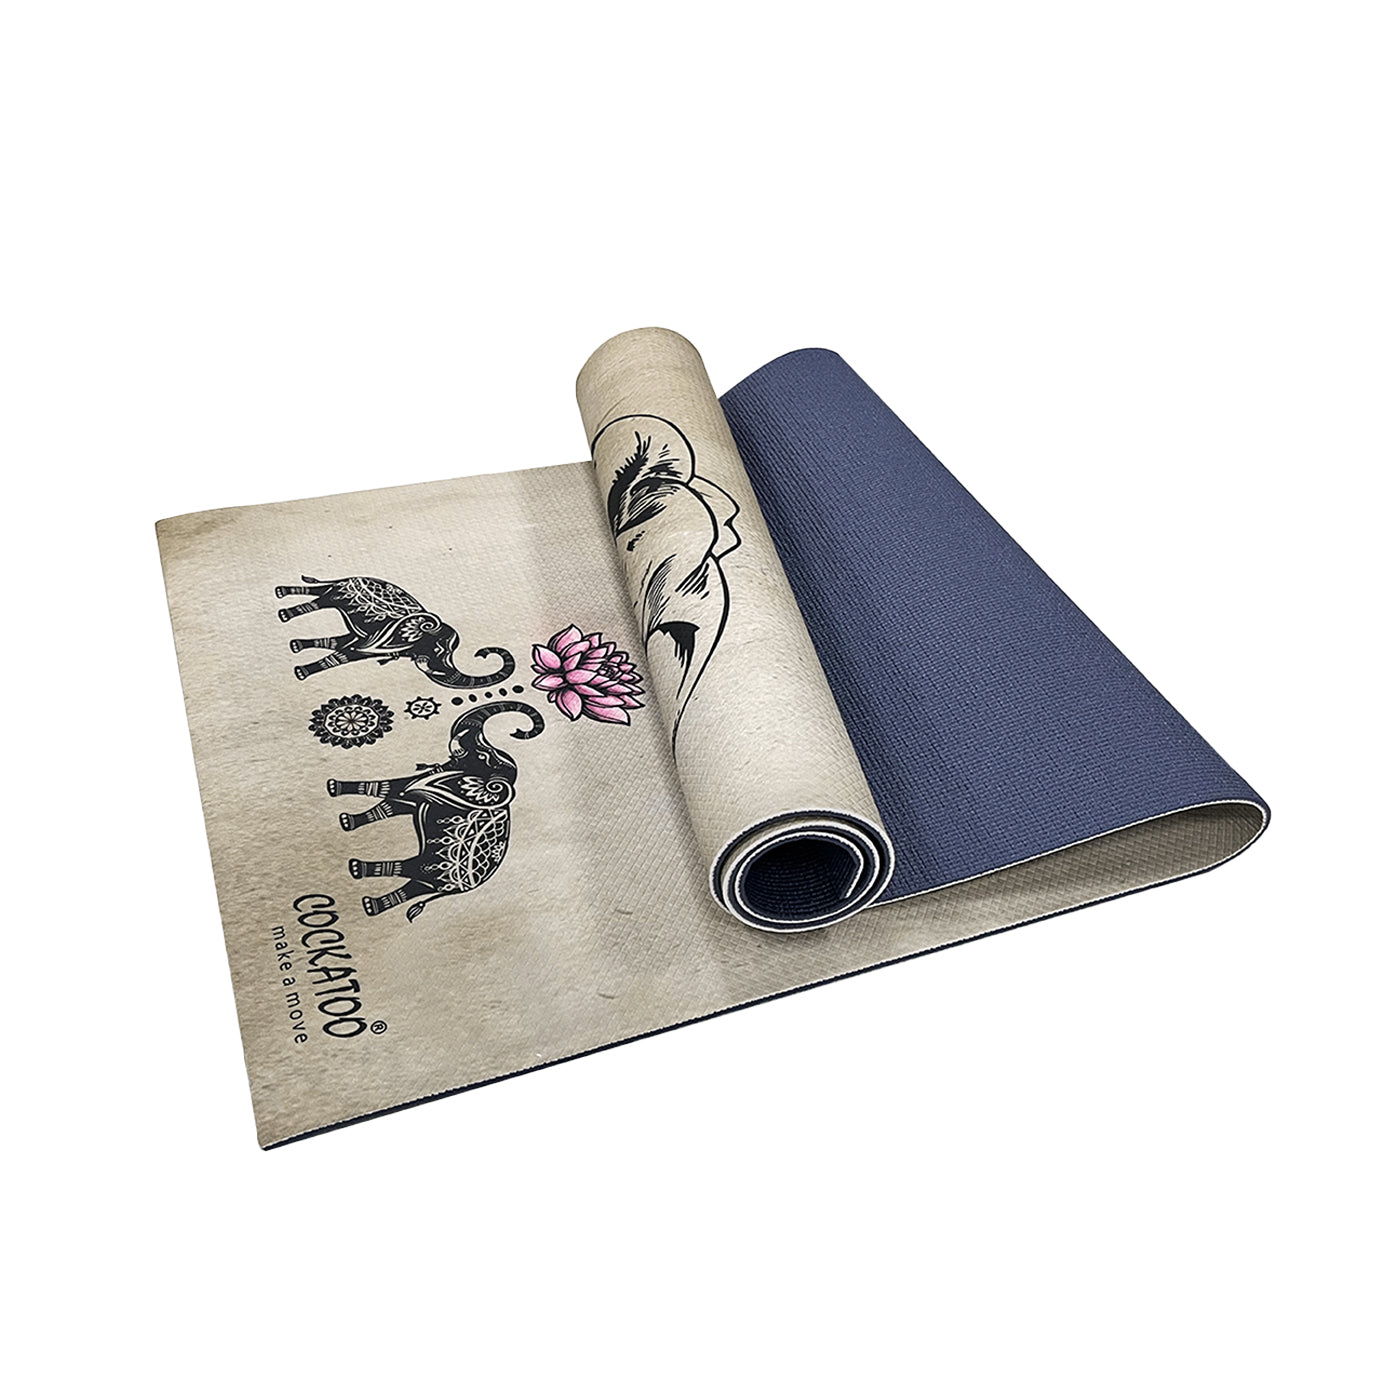 SKYCANDLE Sports White 6 mm Yoga Mat - Buy SKYCANDLE Sports White 6 mm Yoga  Mat Online at Best Prices in India - Sports & Fitness